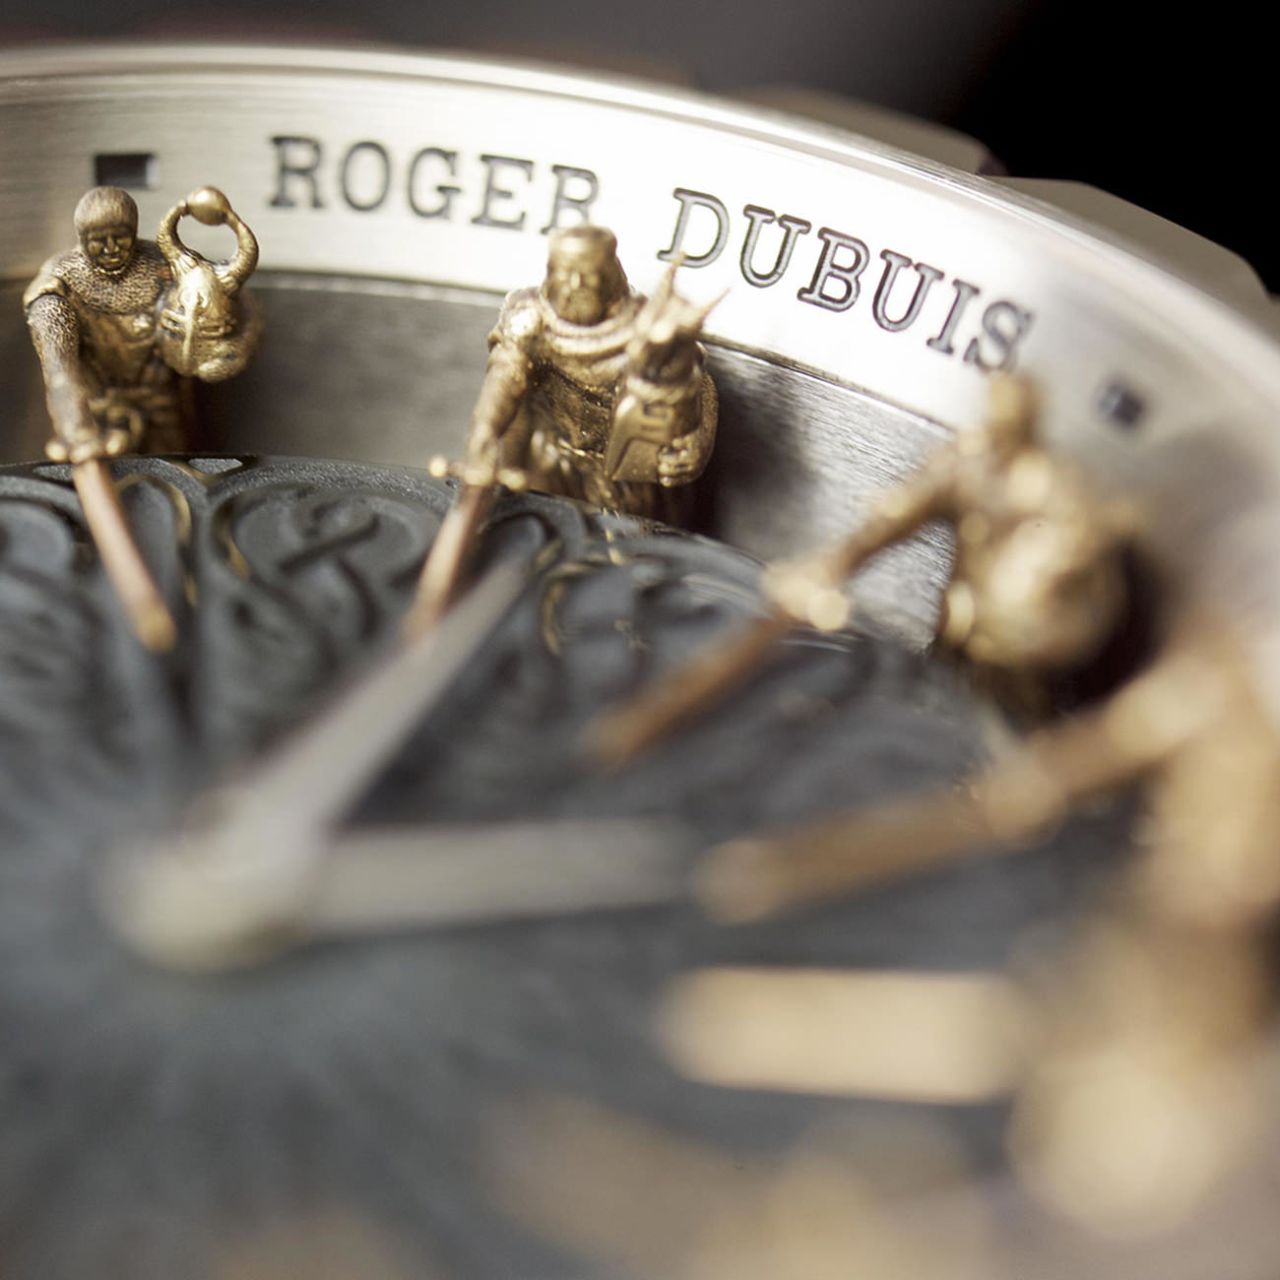 Roger Dubuis' Knights of the Round Table reveals a warrior sat at each of the indices.